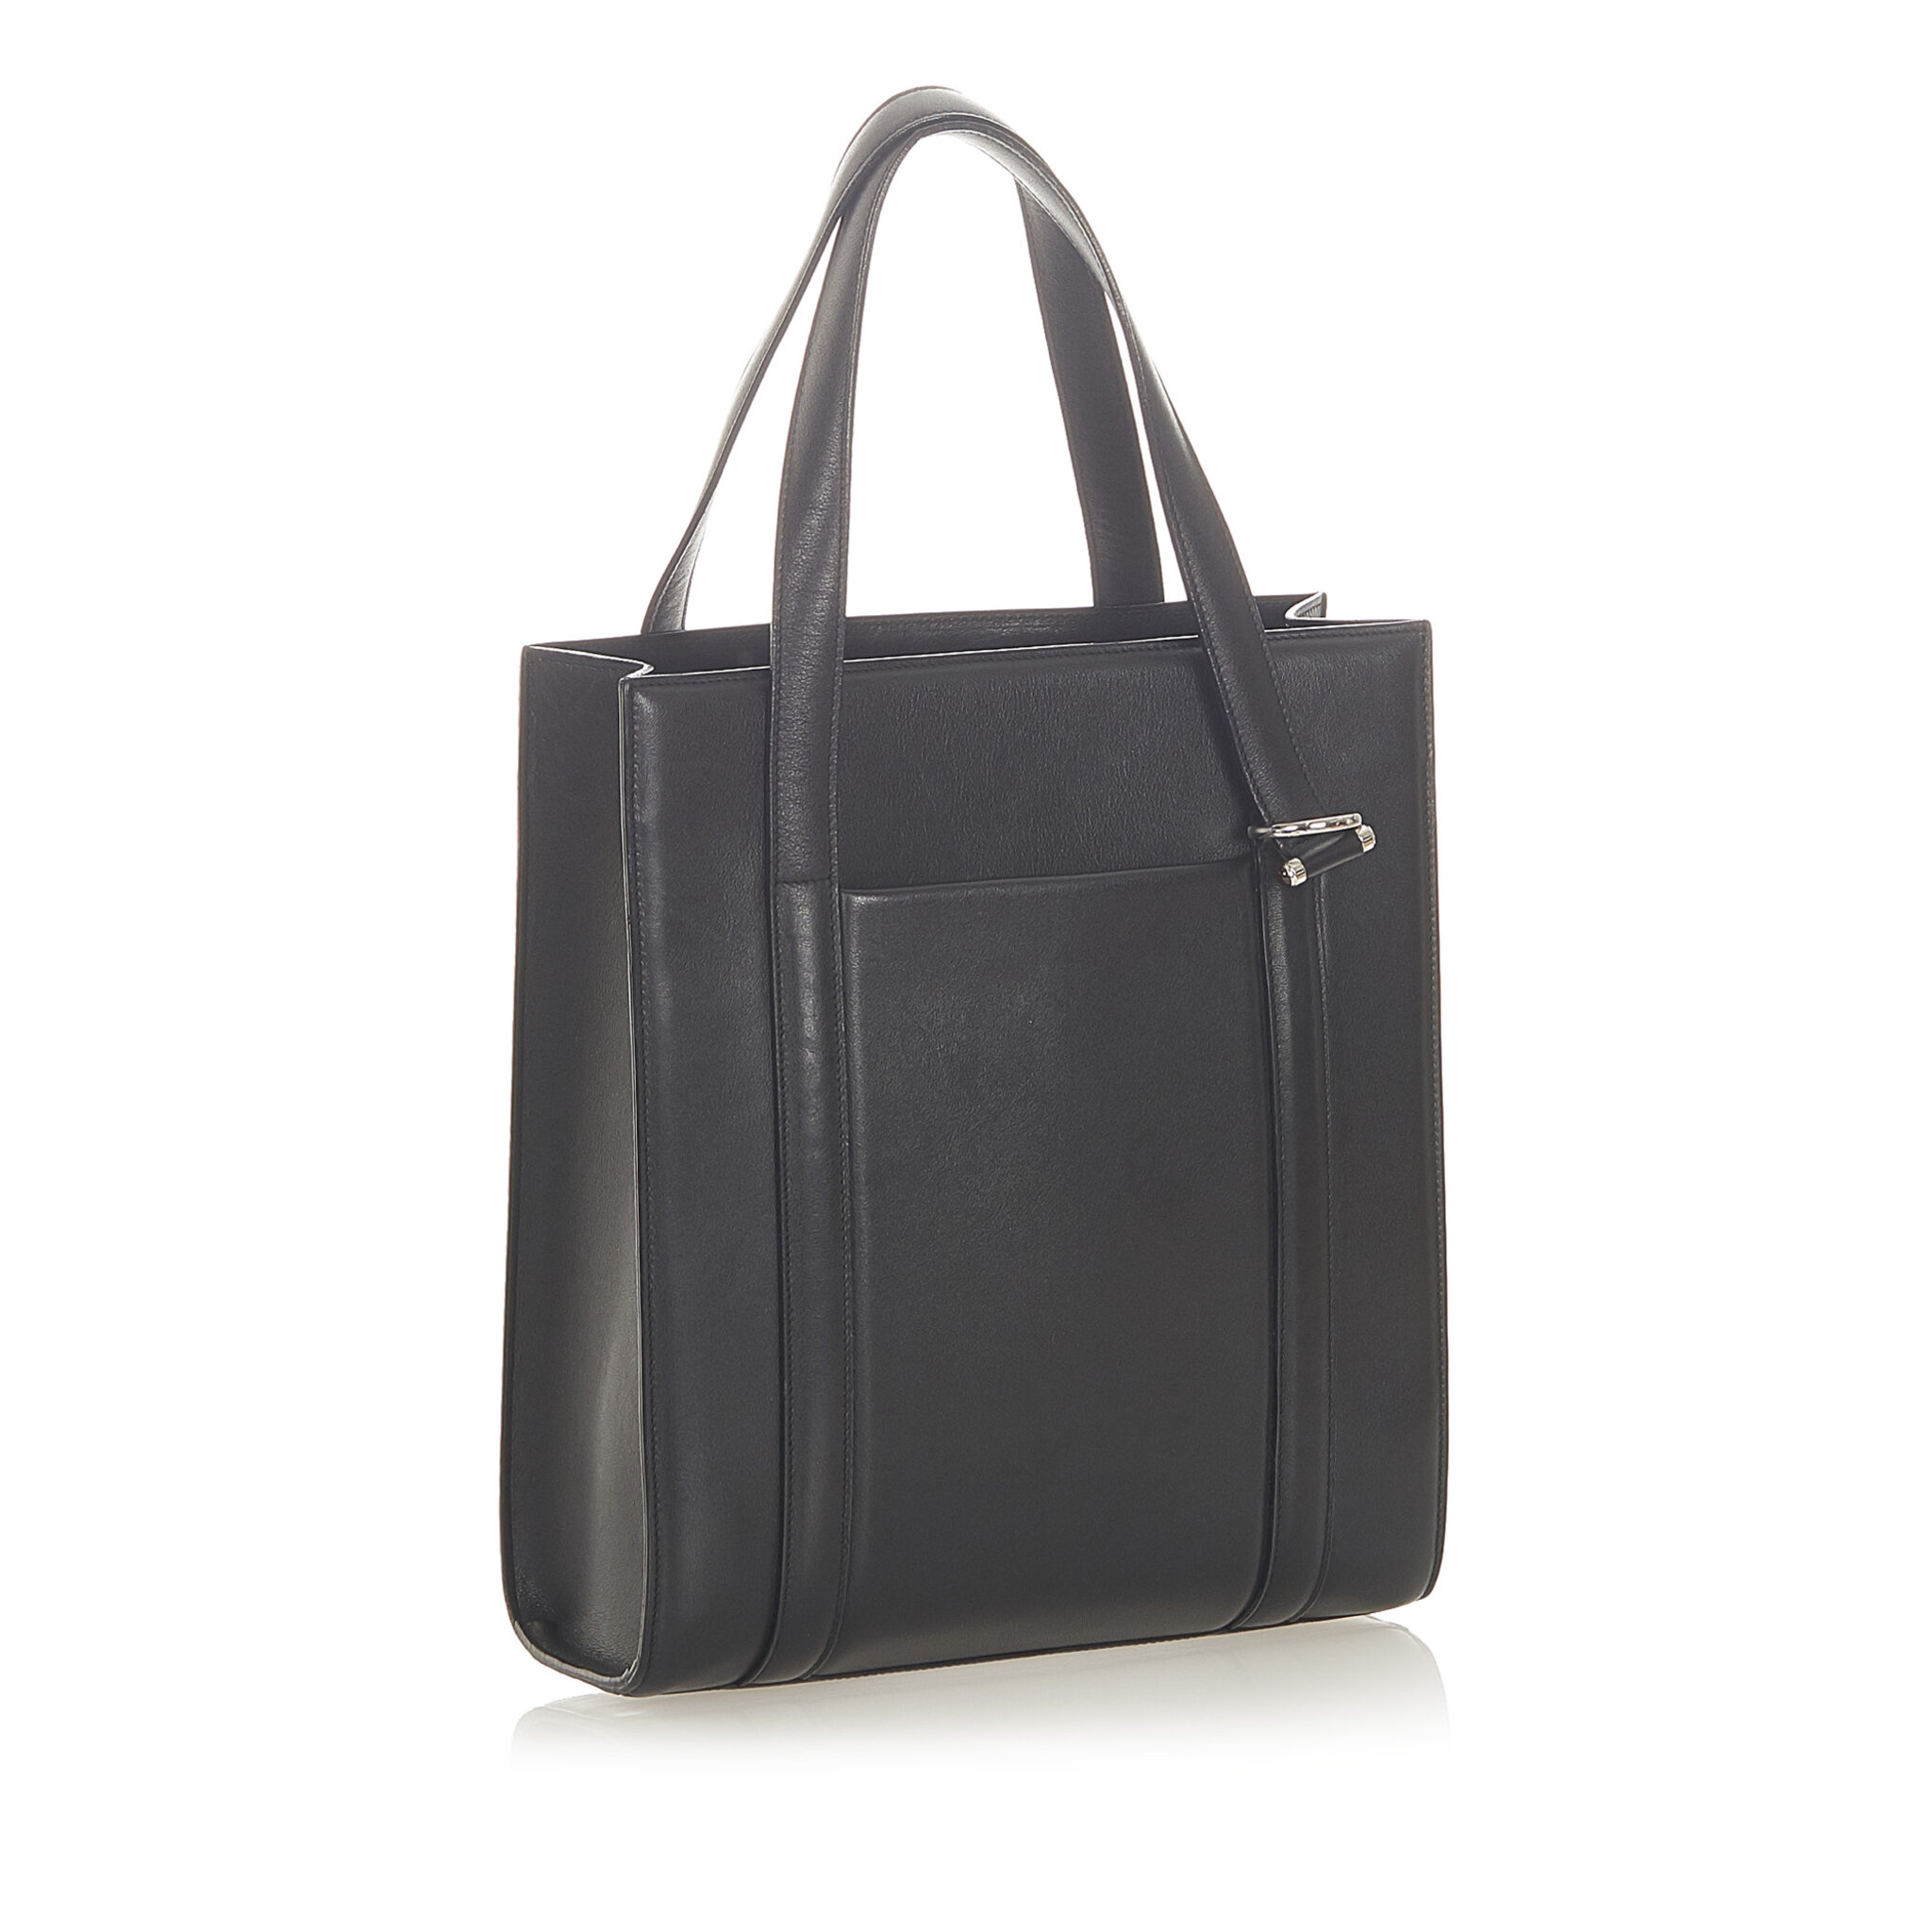 Cartier Leather Tote Bag, black